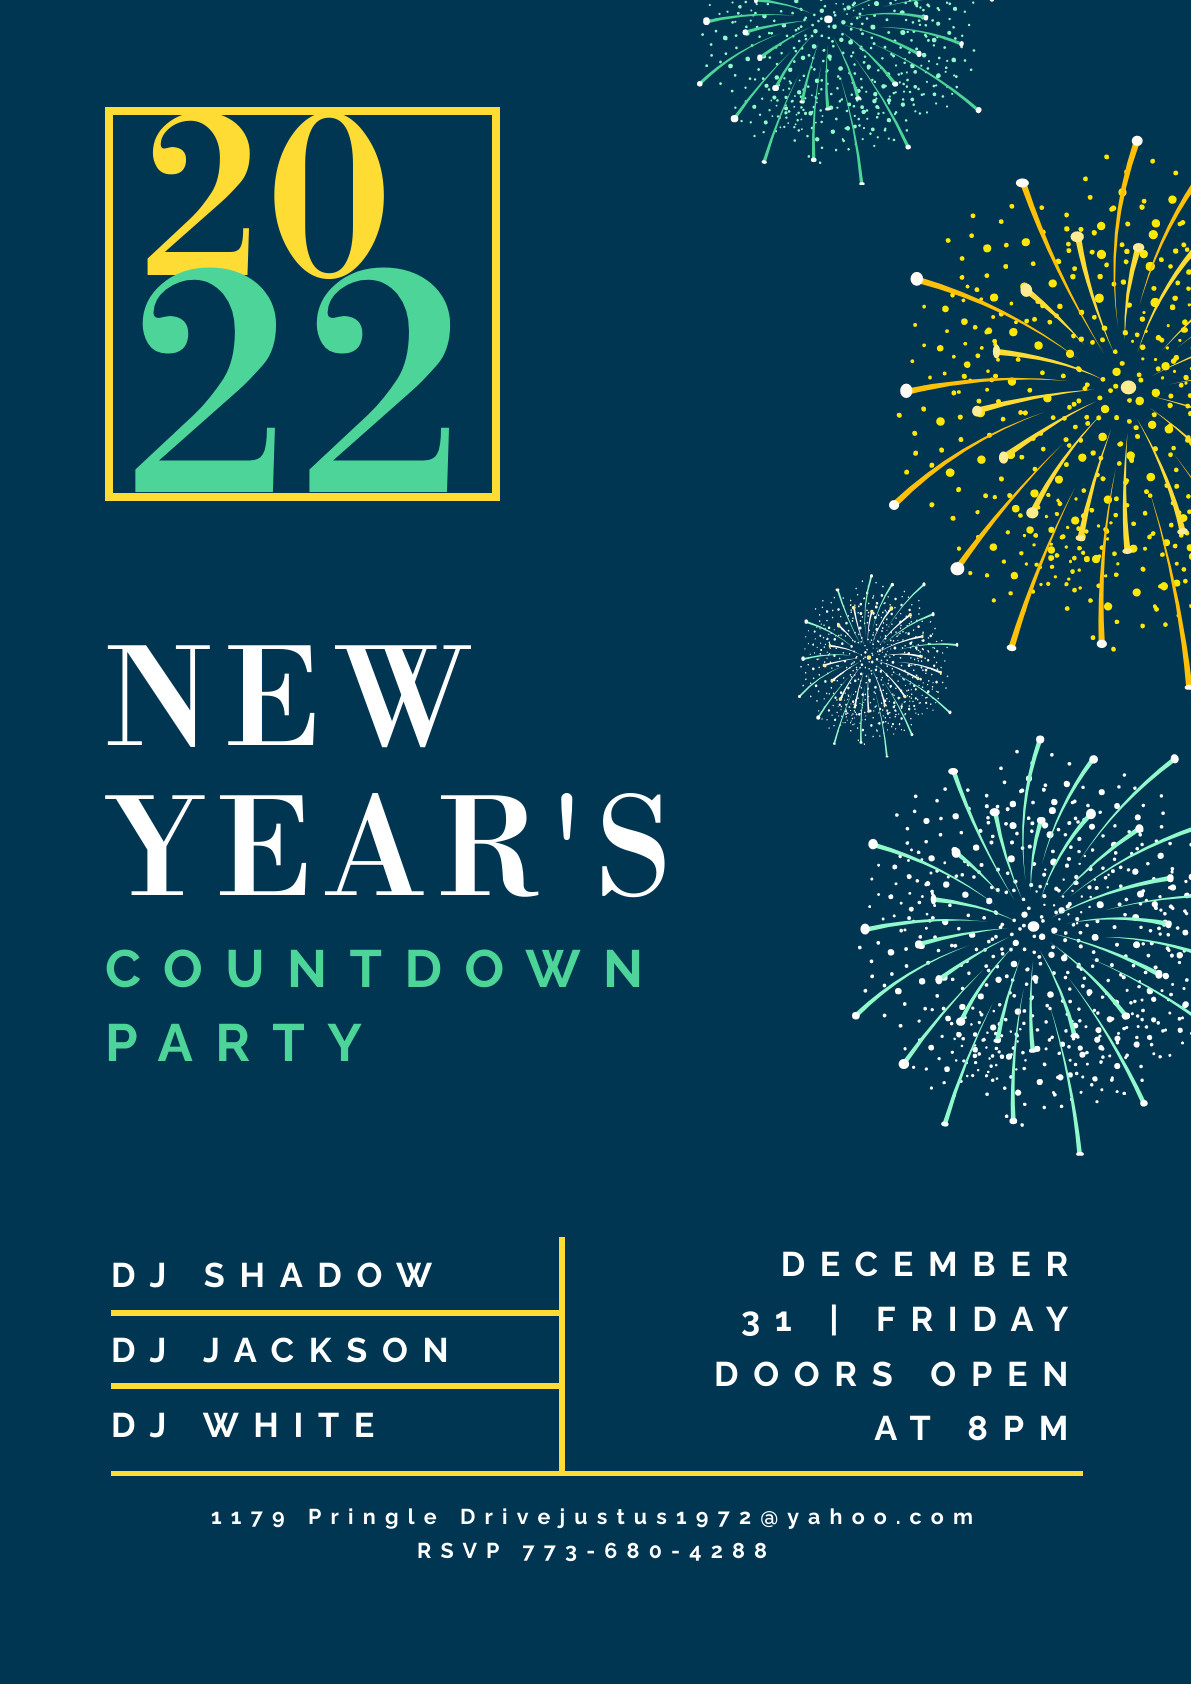 2022 New Year's Countdown Party Poster 1191x1684